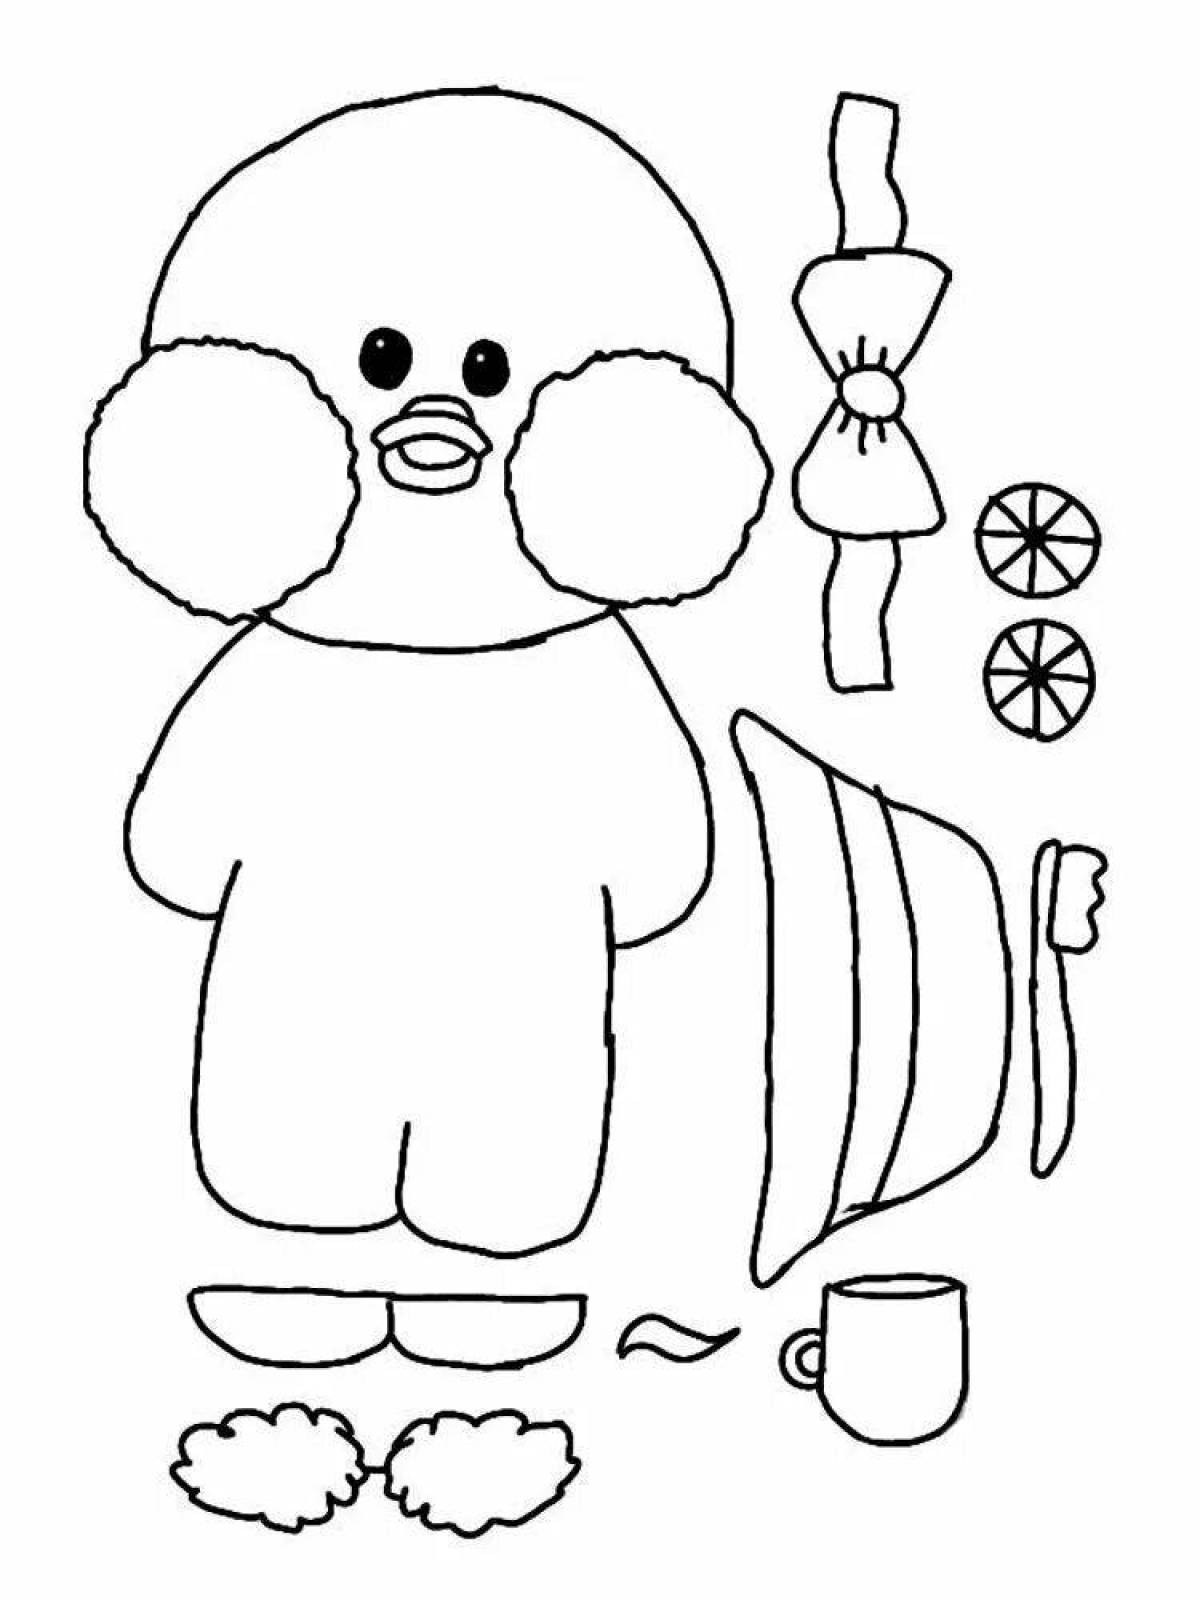 Coloring book irresistible little duck - lalafanfan